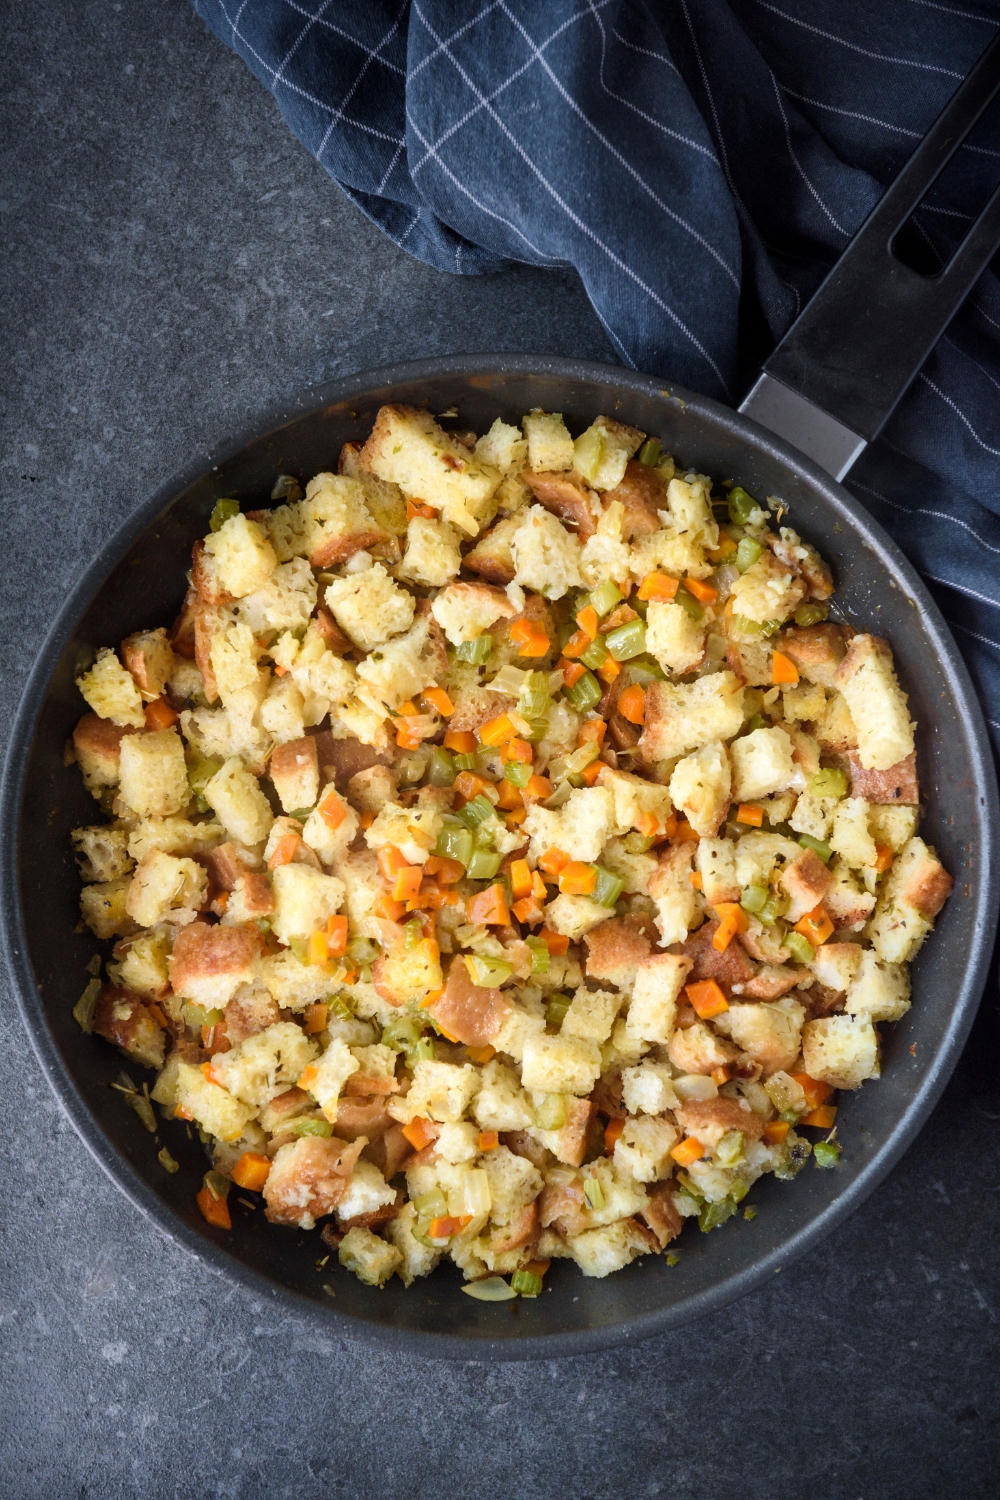 A skillet filled with stovetop stuffing mixed with diced celery, carrots, and onion.